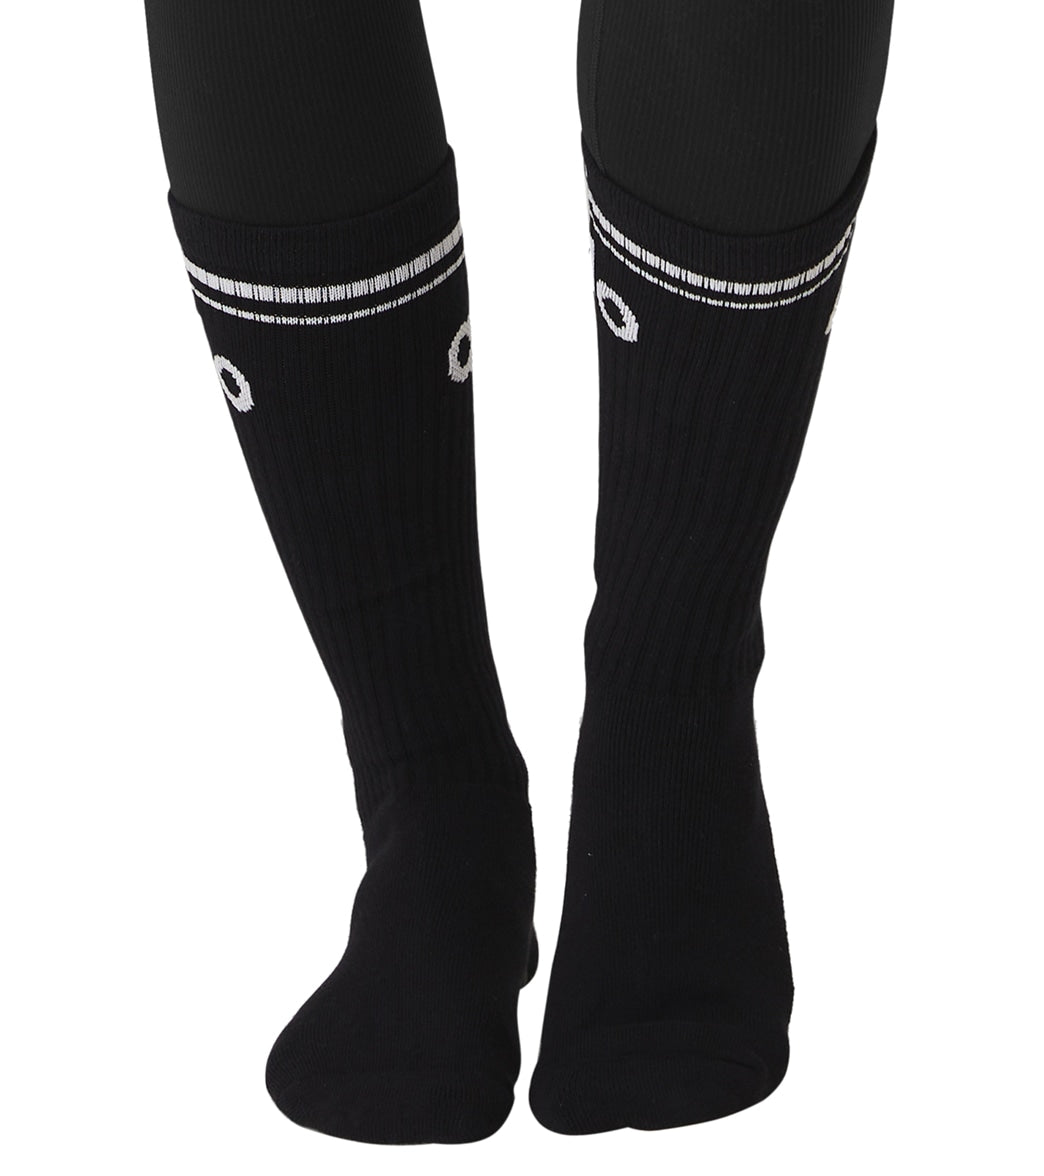 Alo Yoga  Women's Knee-High Throwback Barre Socks in White/Black, Size:  S/M (5-7.5) - ShopStyle